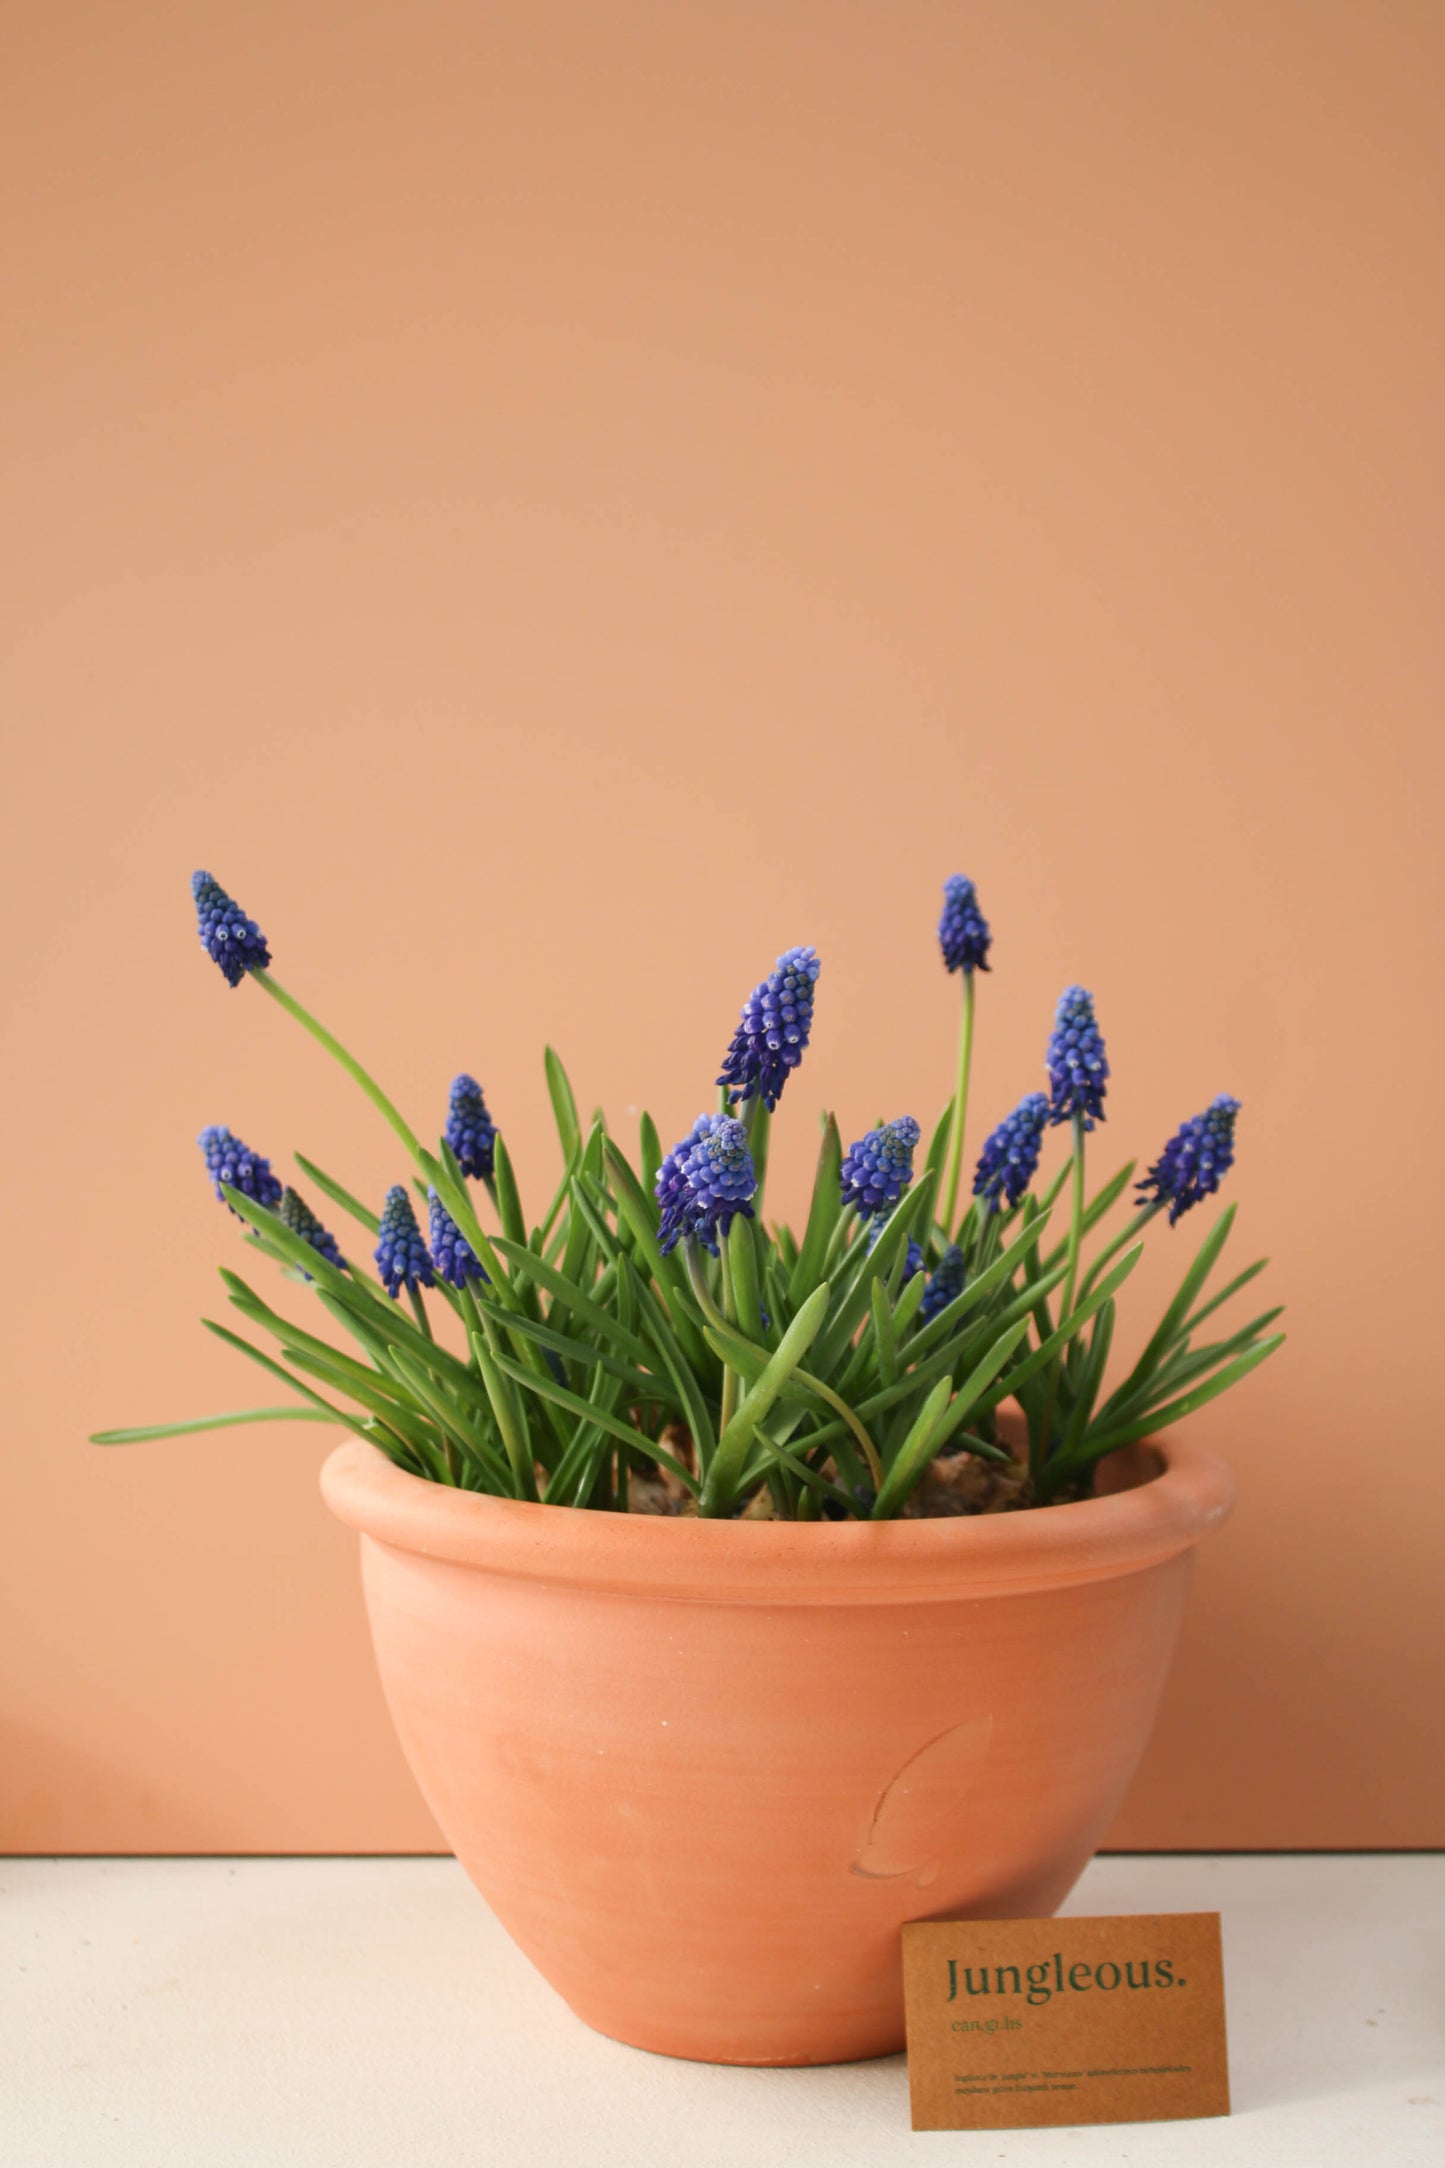 Cup of Muscari